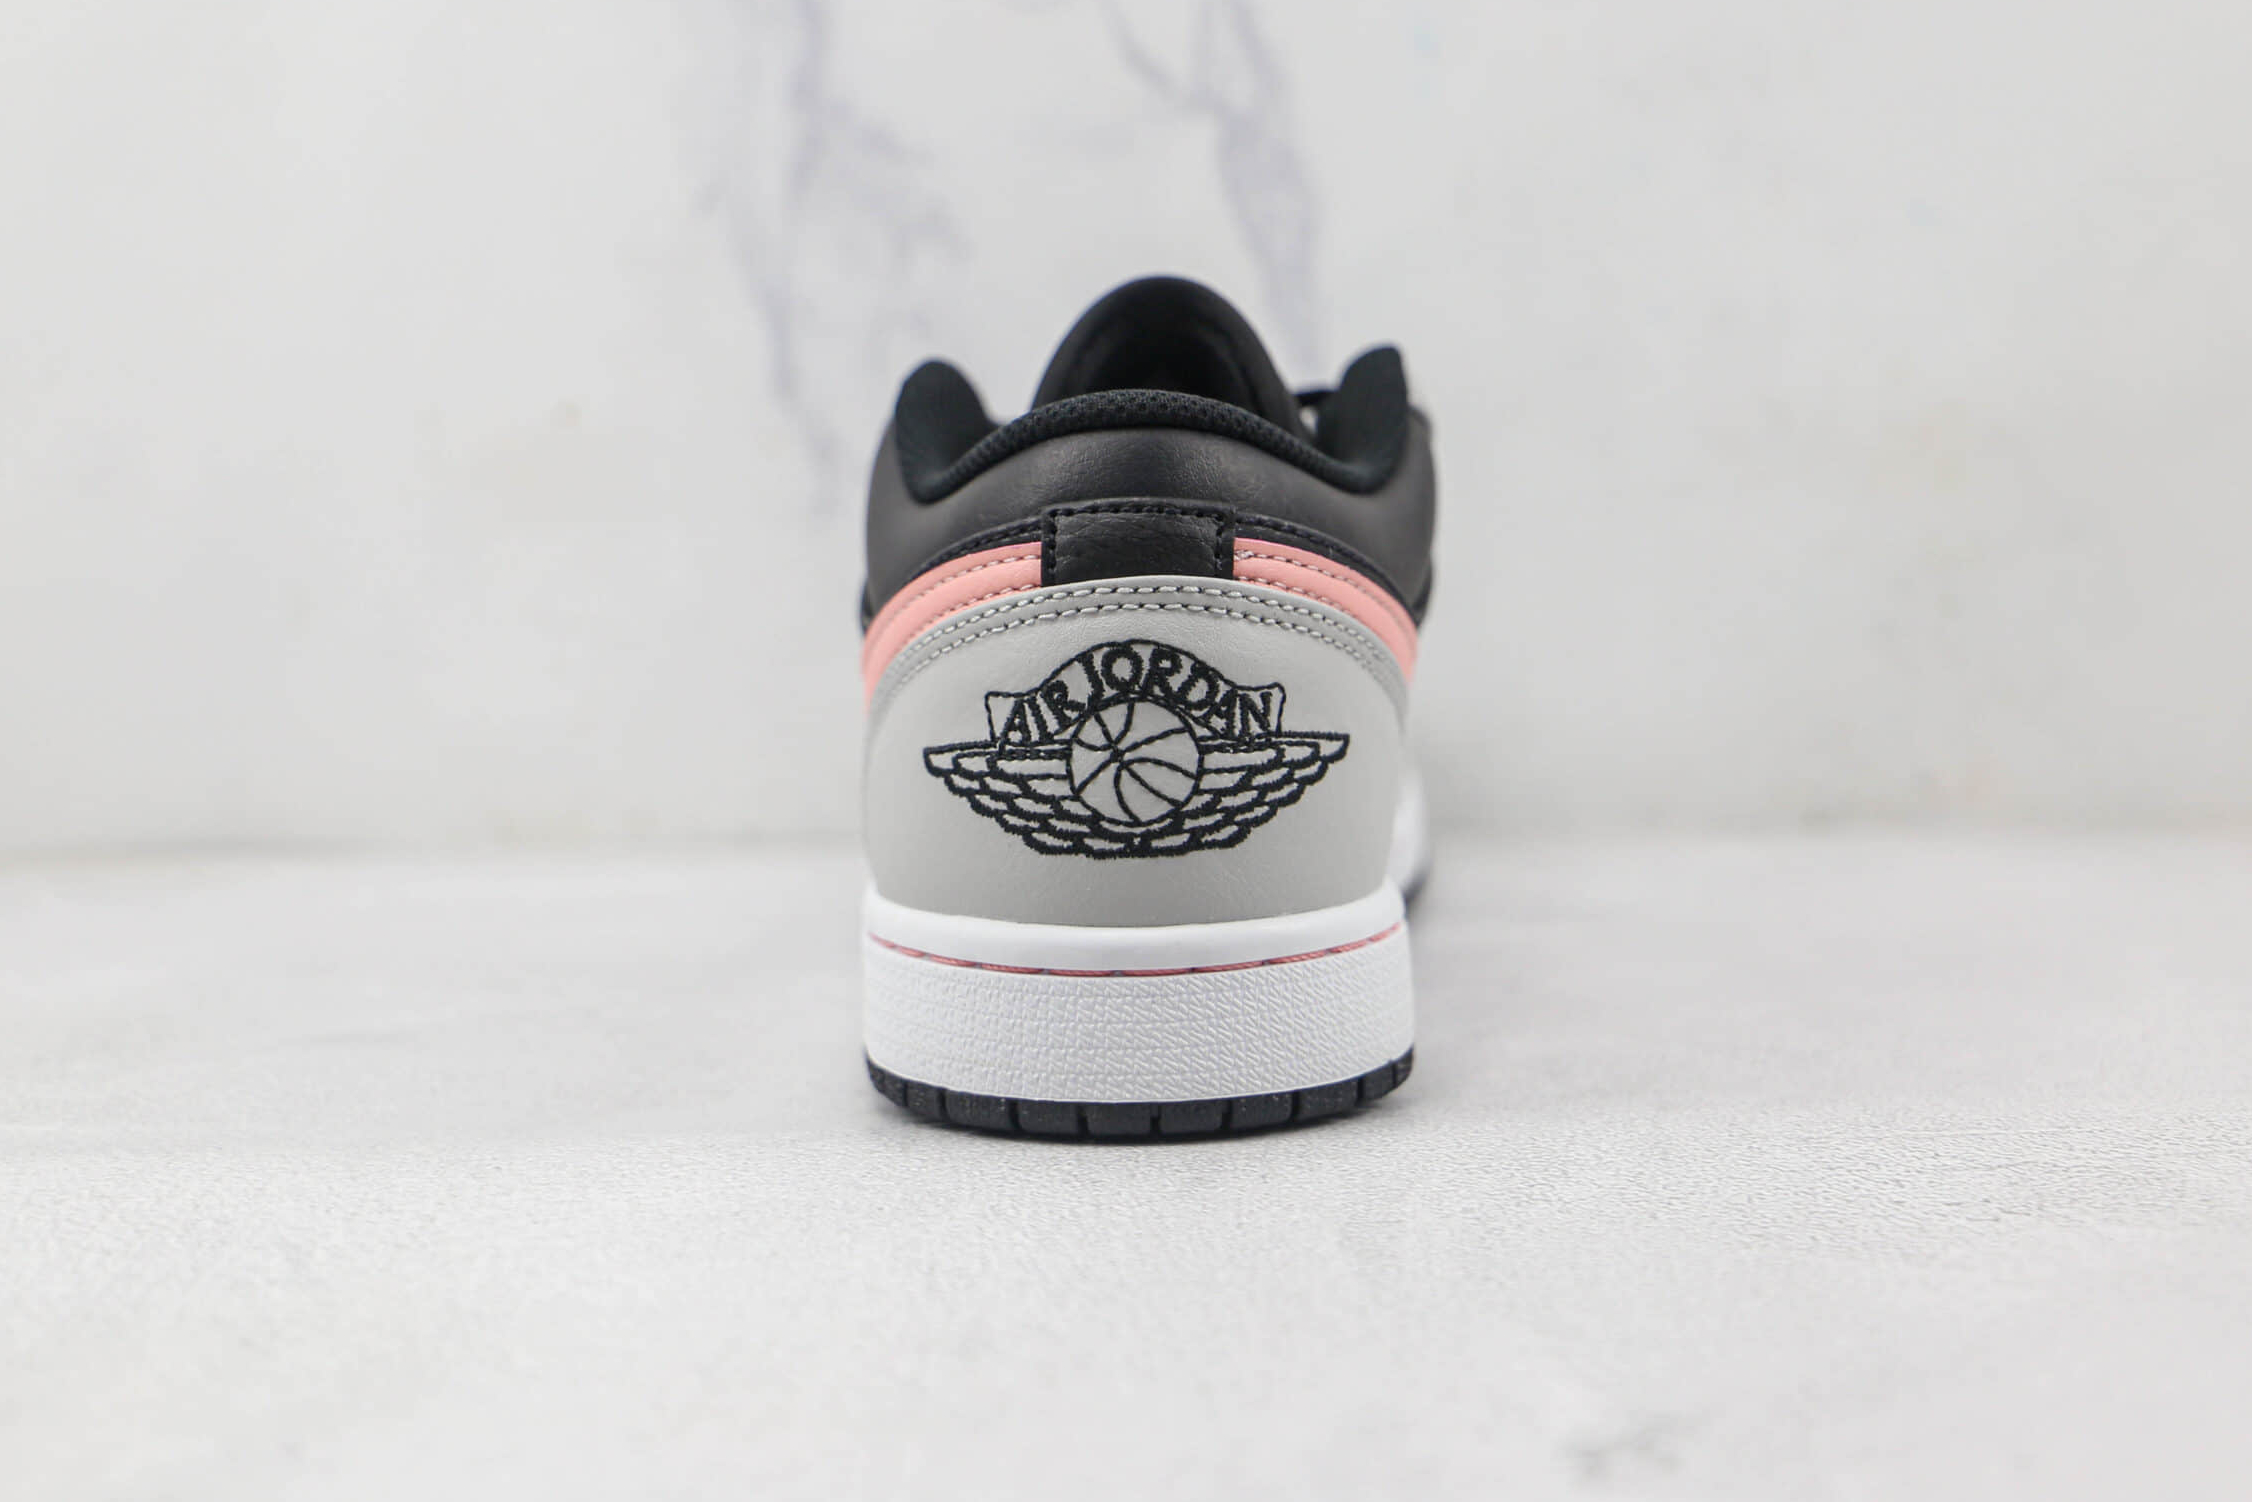 Air Jordan 1 Low 'Grey Fog Bleached Coral' 553558-062 - Stylish and Unique Sneakers